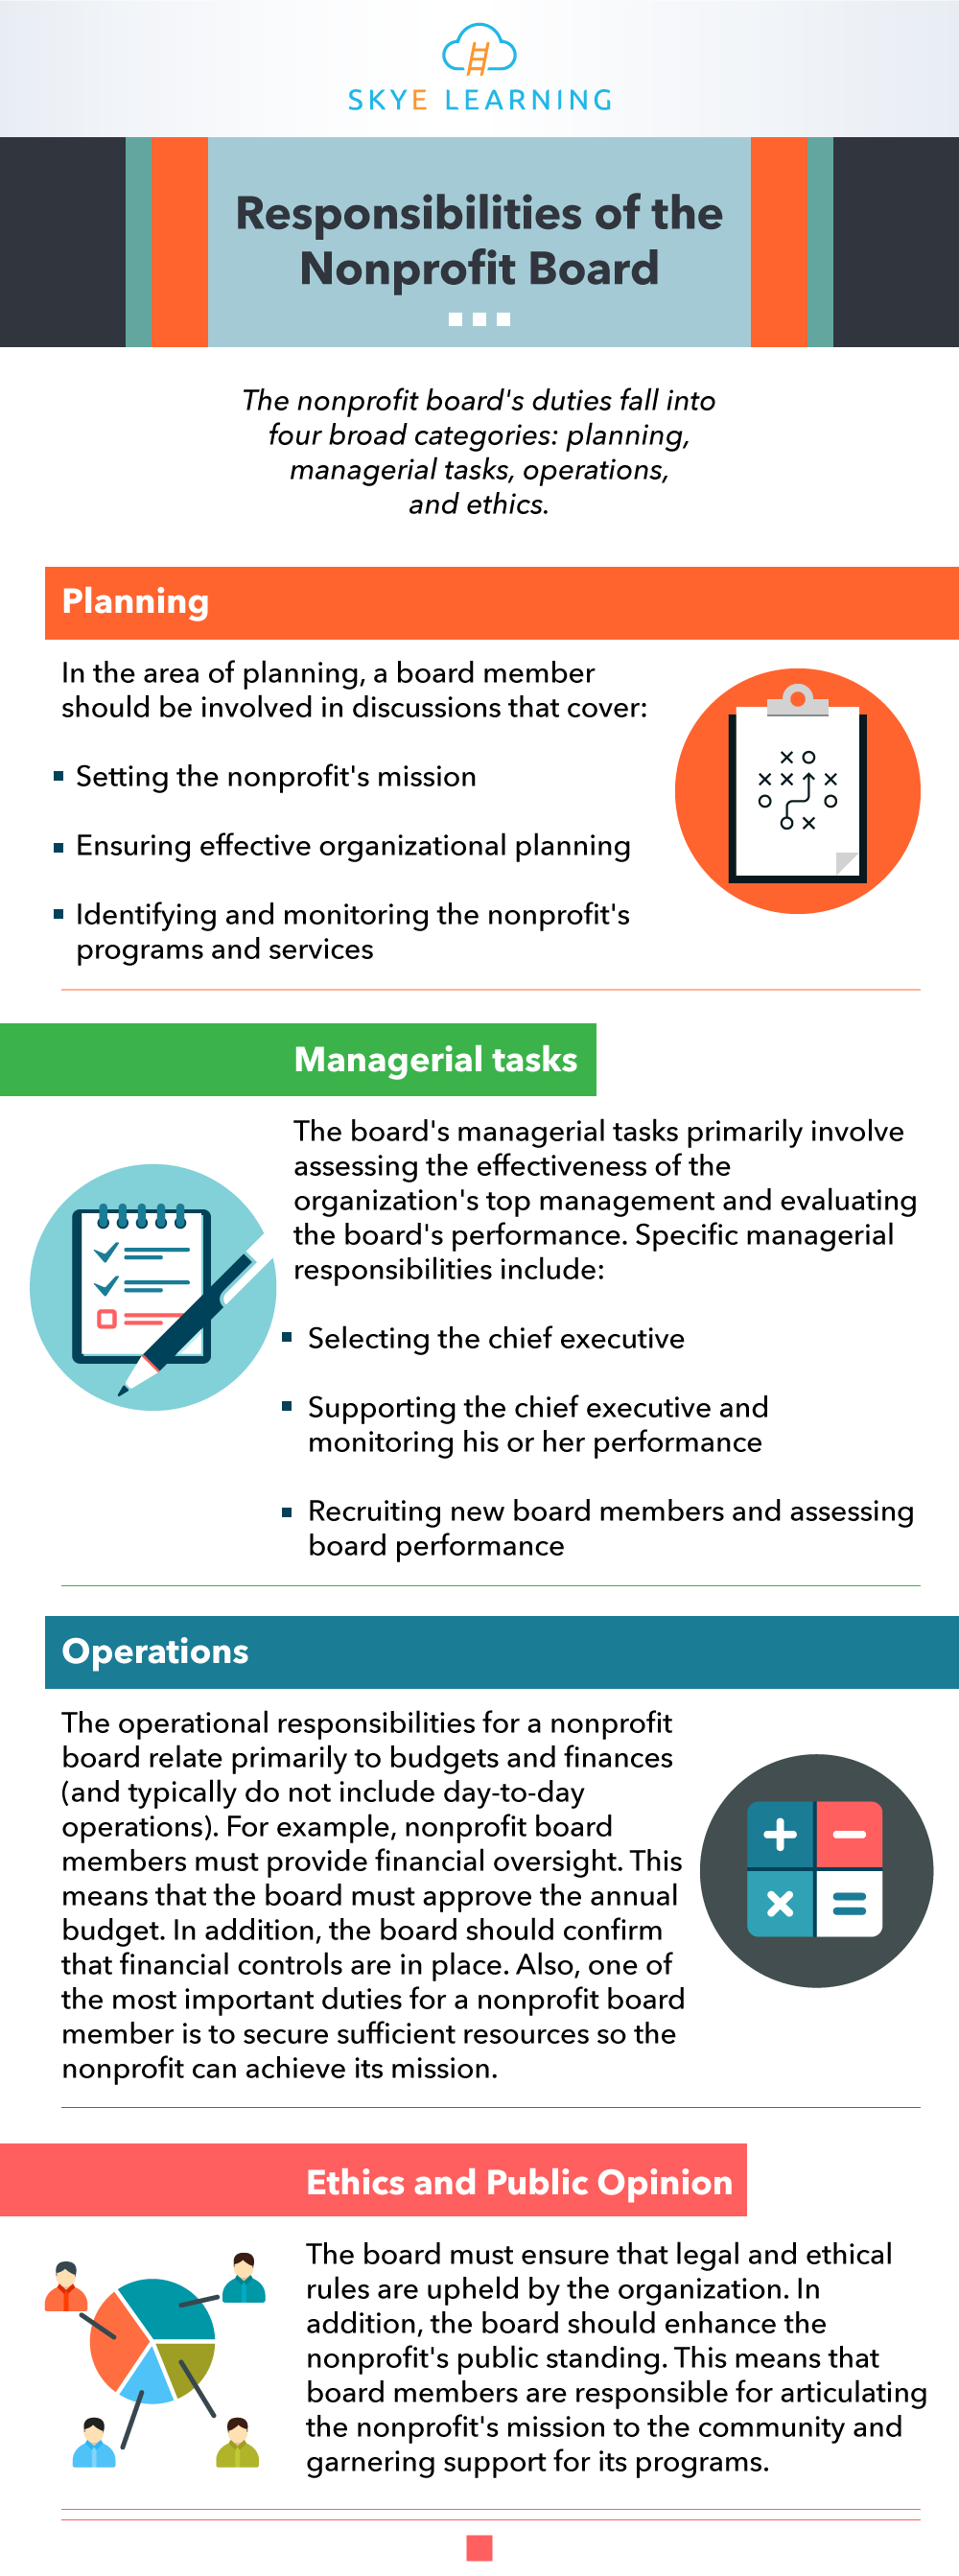 Responsibilities of the Nonprofit Board